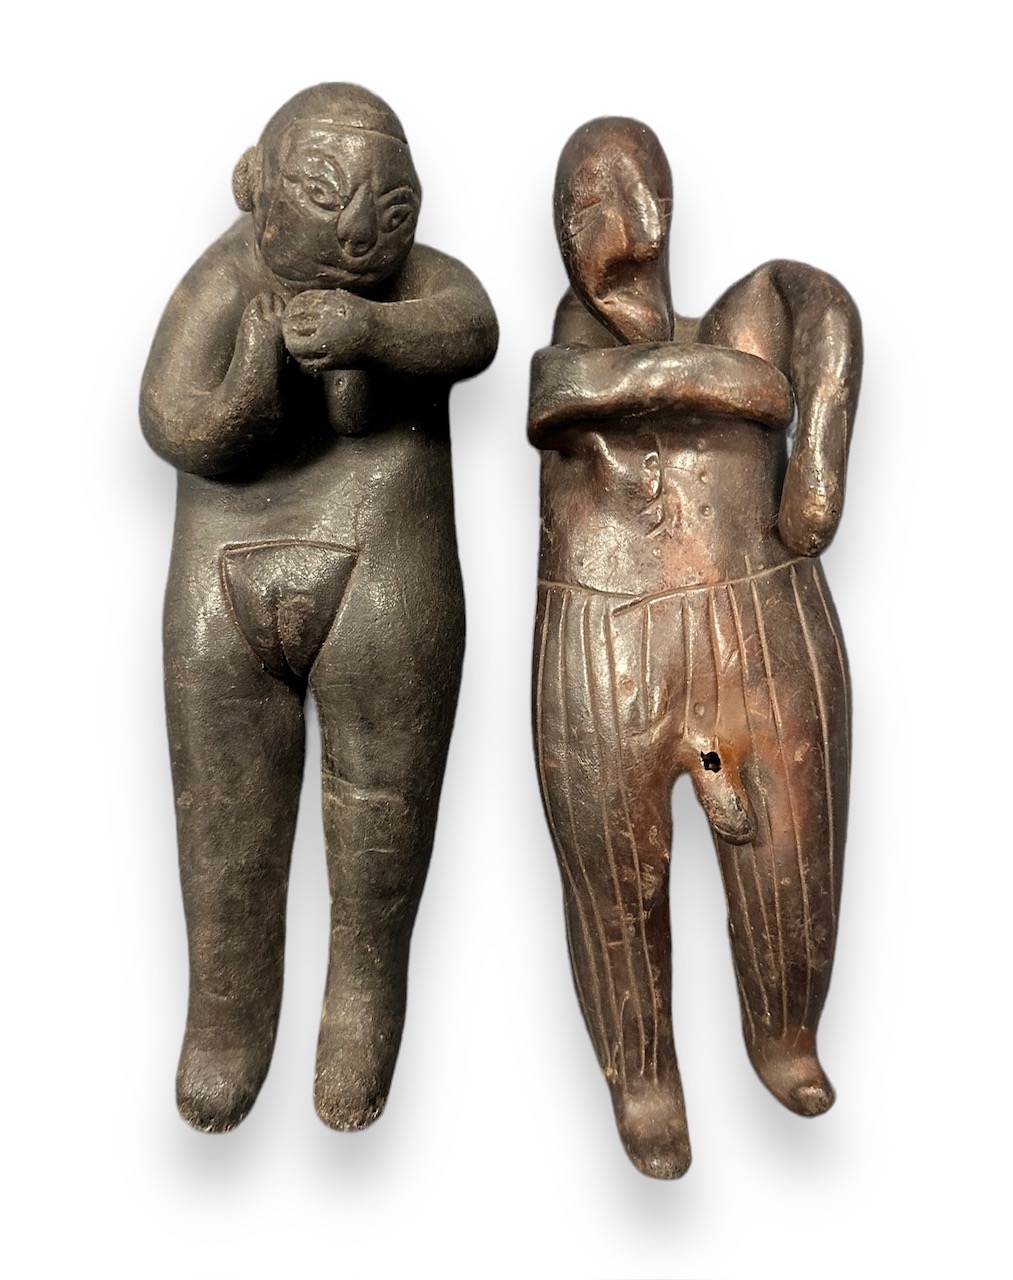 Traditional pair of African fertility sculptural figures / figurines, likely made of rubber and